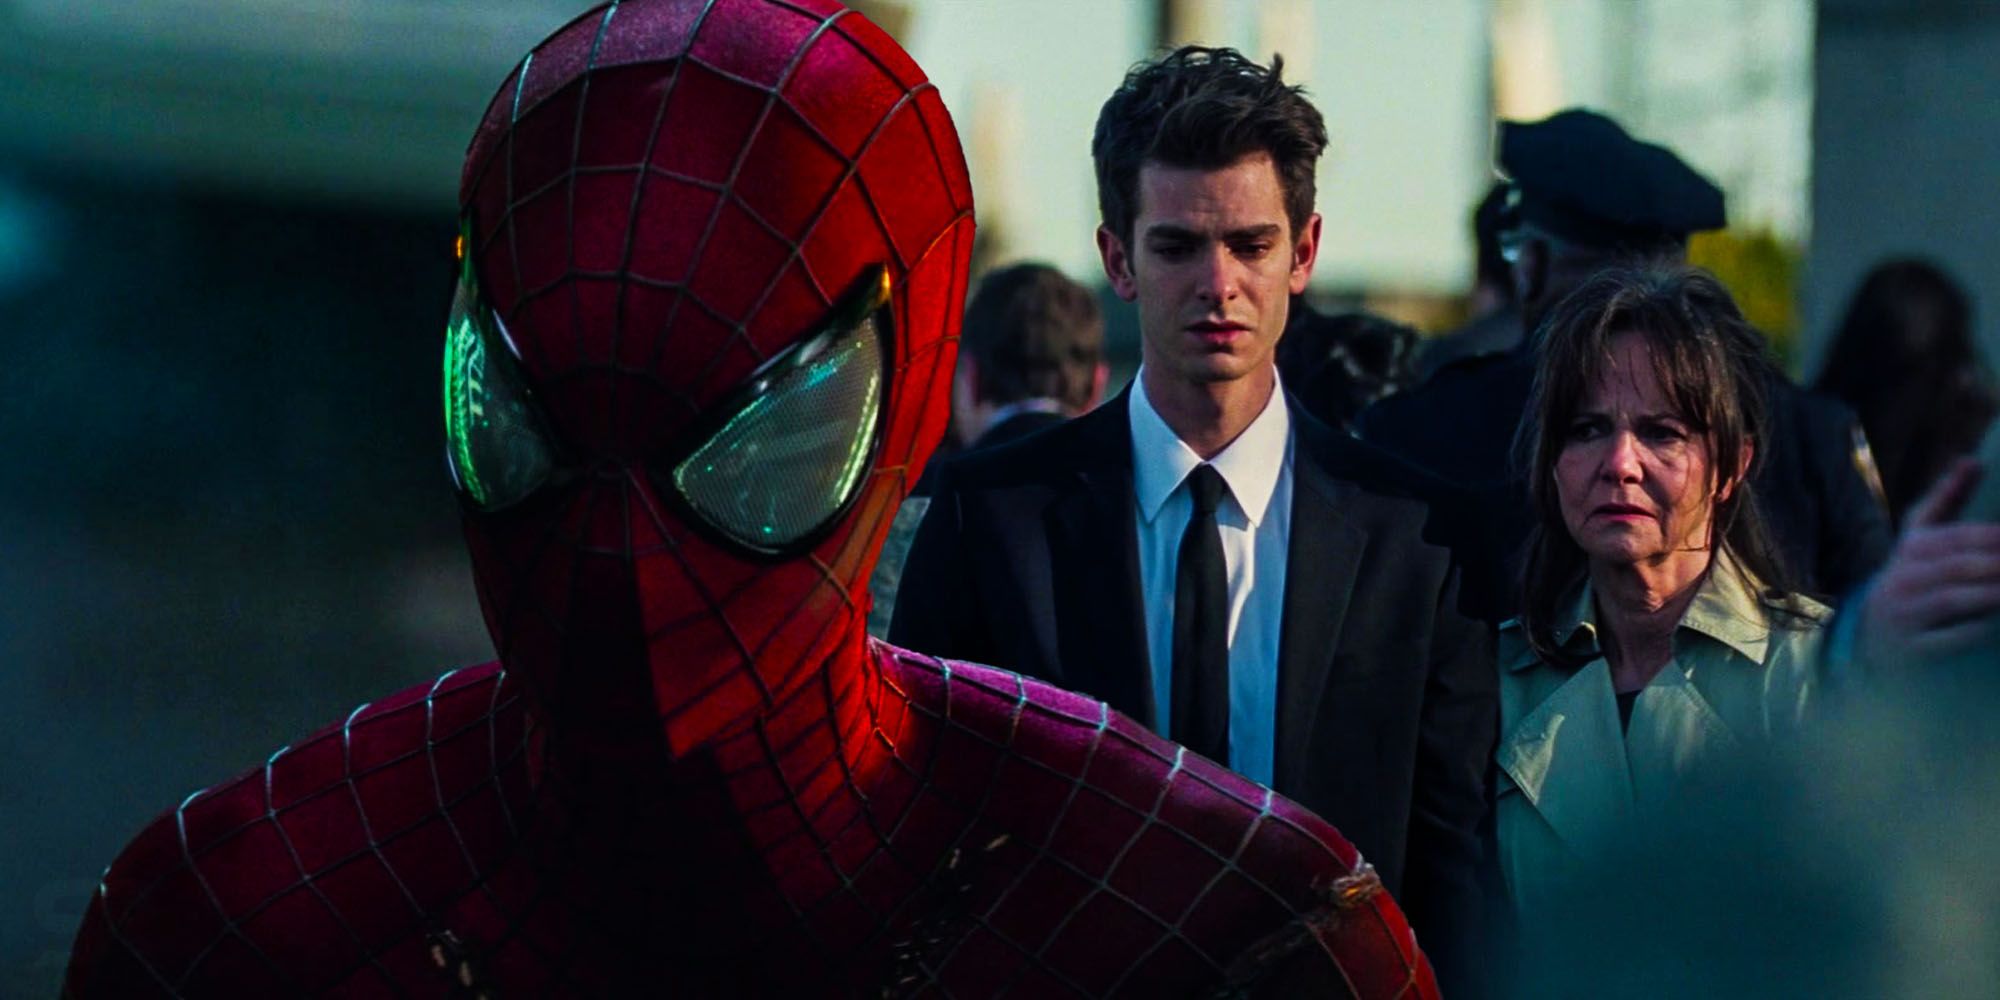 Could The Amazing Spider-Man 3 With Andrew Garfield Still Happen